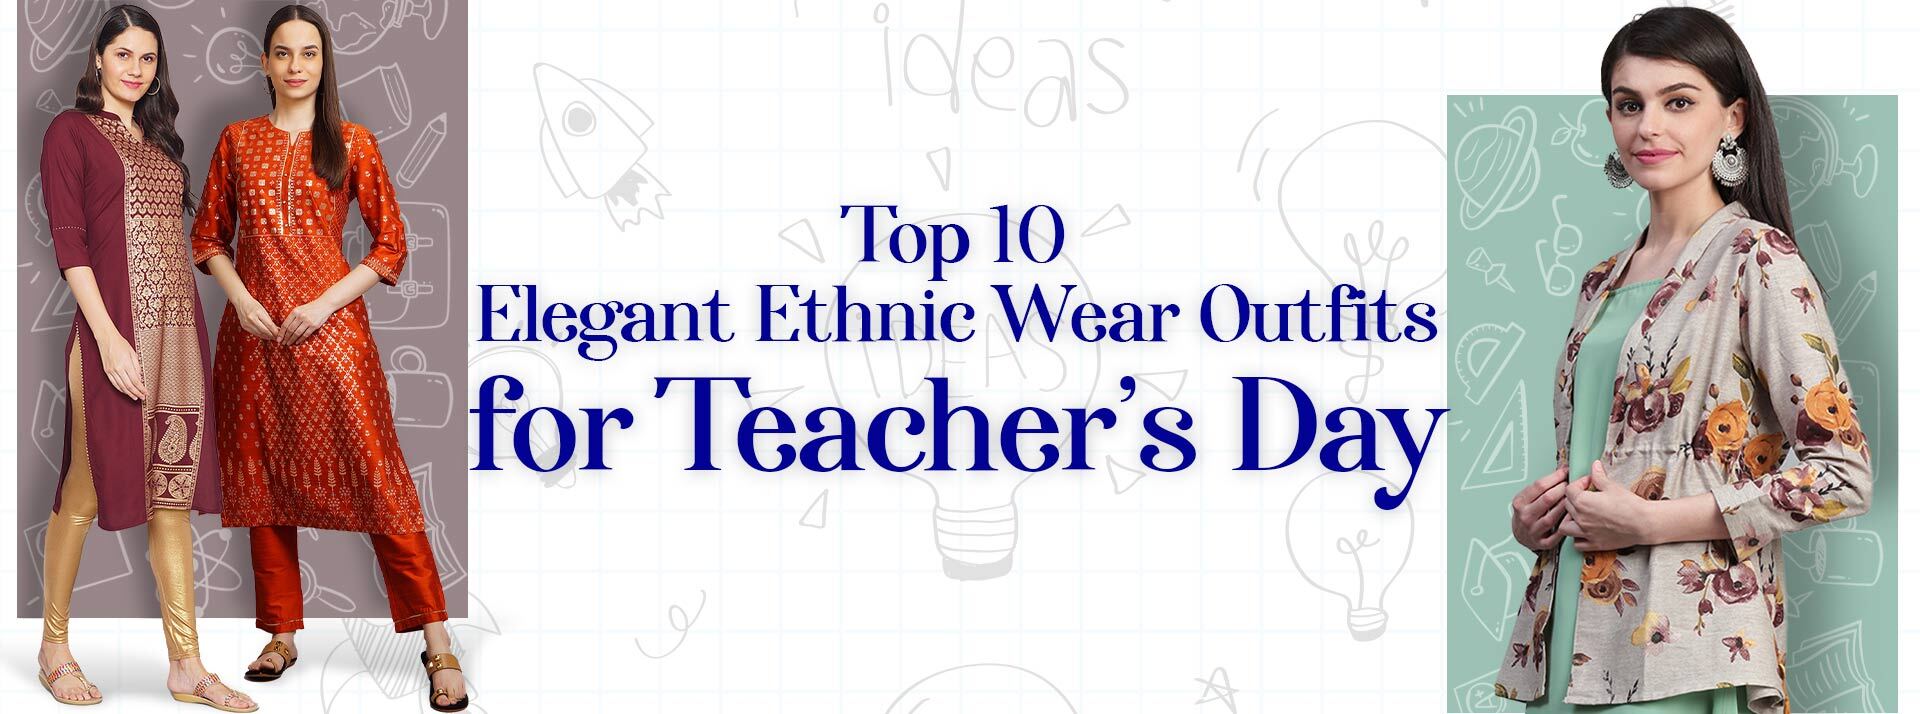 Top 10 Elegant Ethnic Wear Outfits for Teacher’s Day